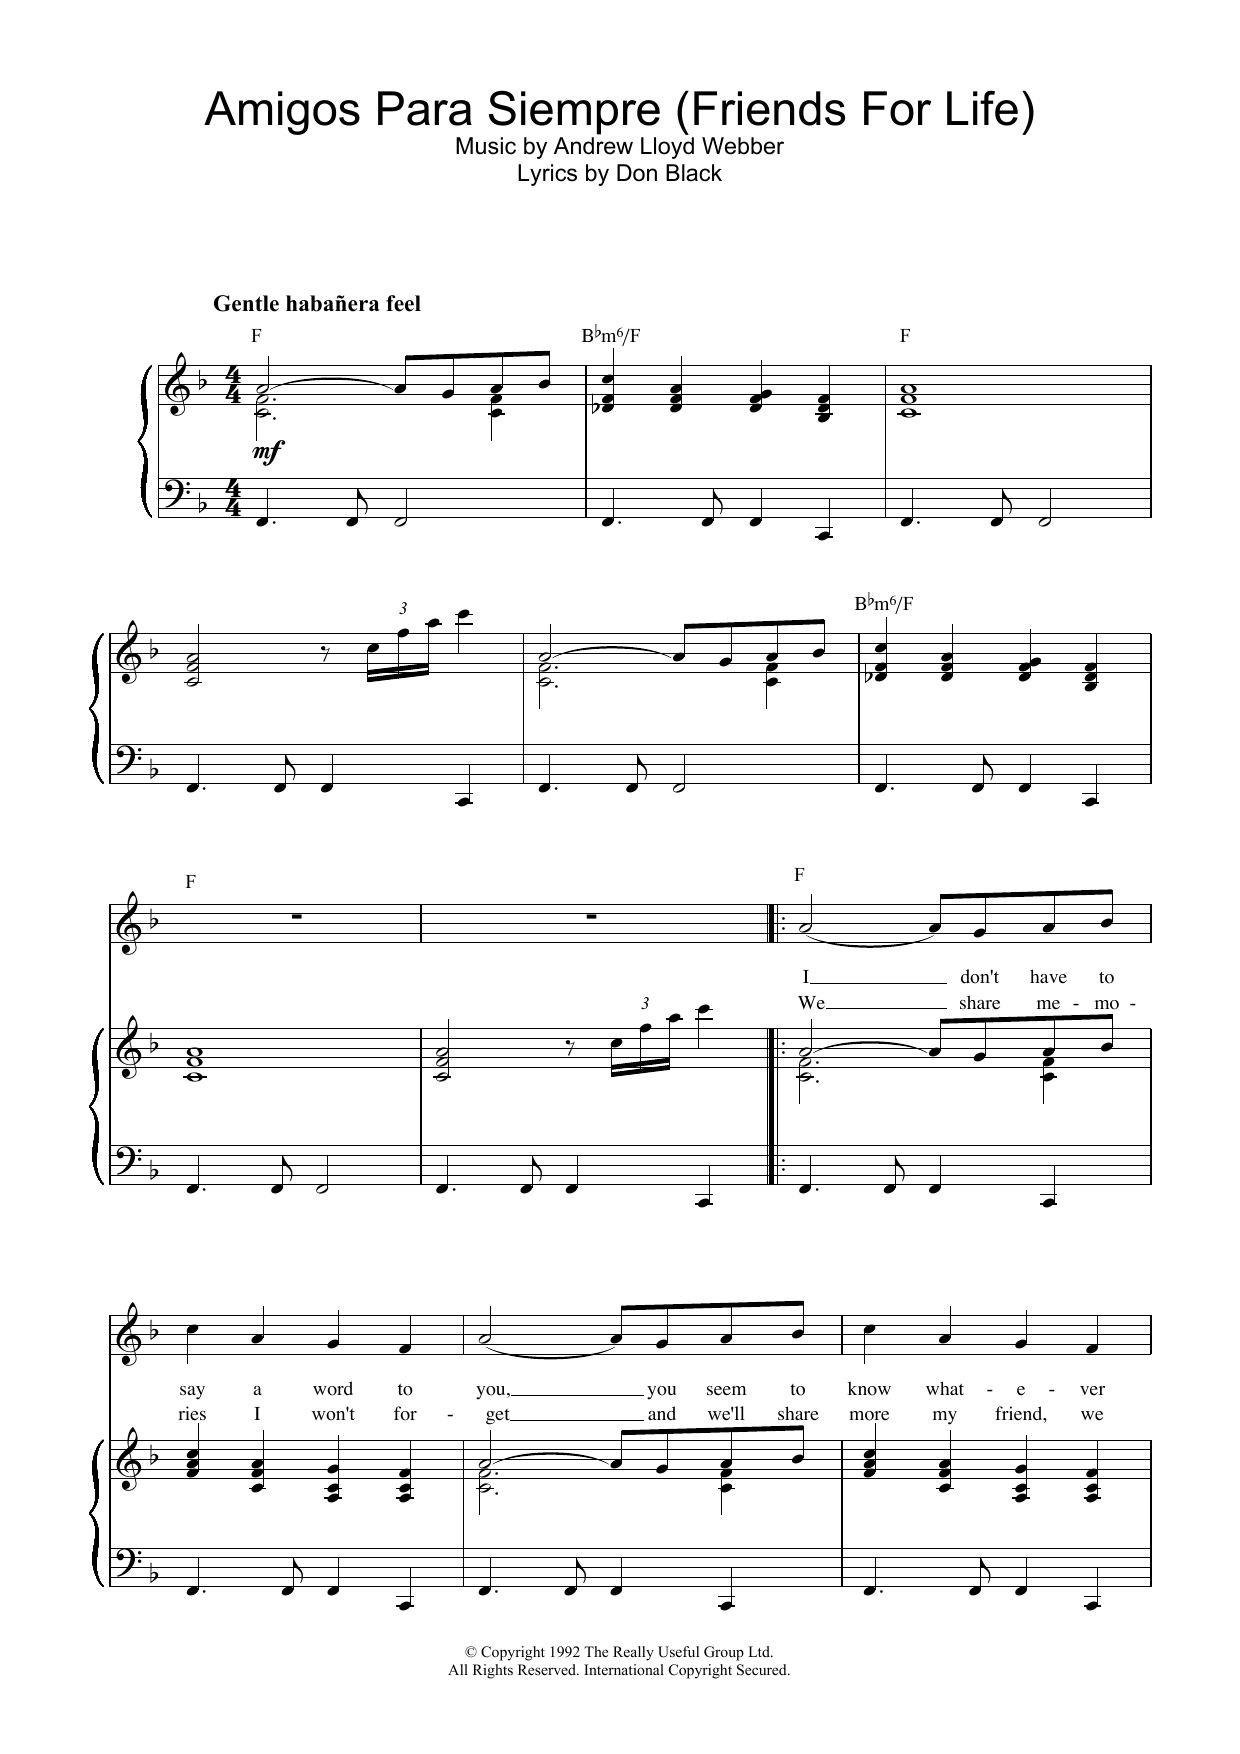 Andrew Lloyd Webber Amigos Para Siempre (Friends For Life) sheet music notes and chords. Download Printable PDF.